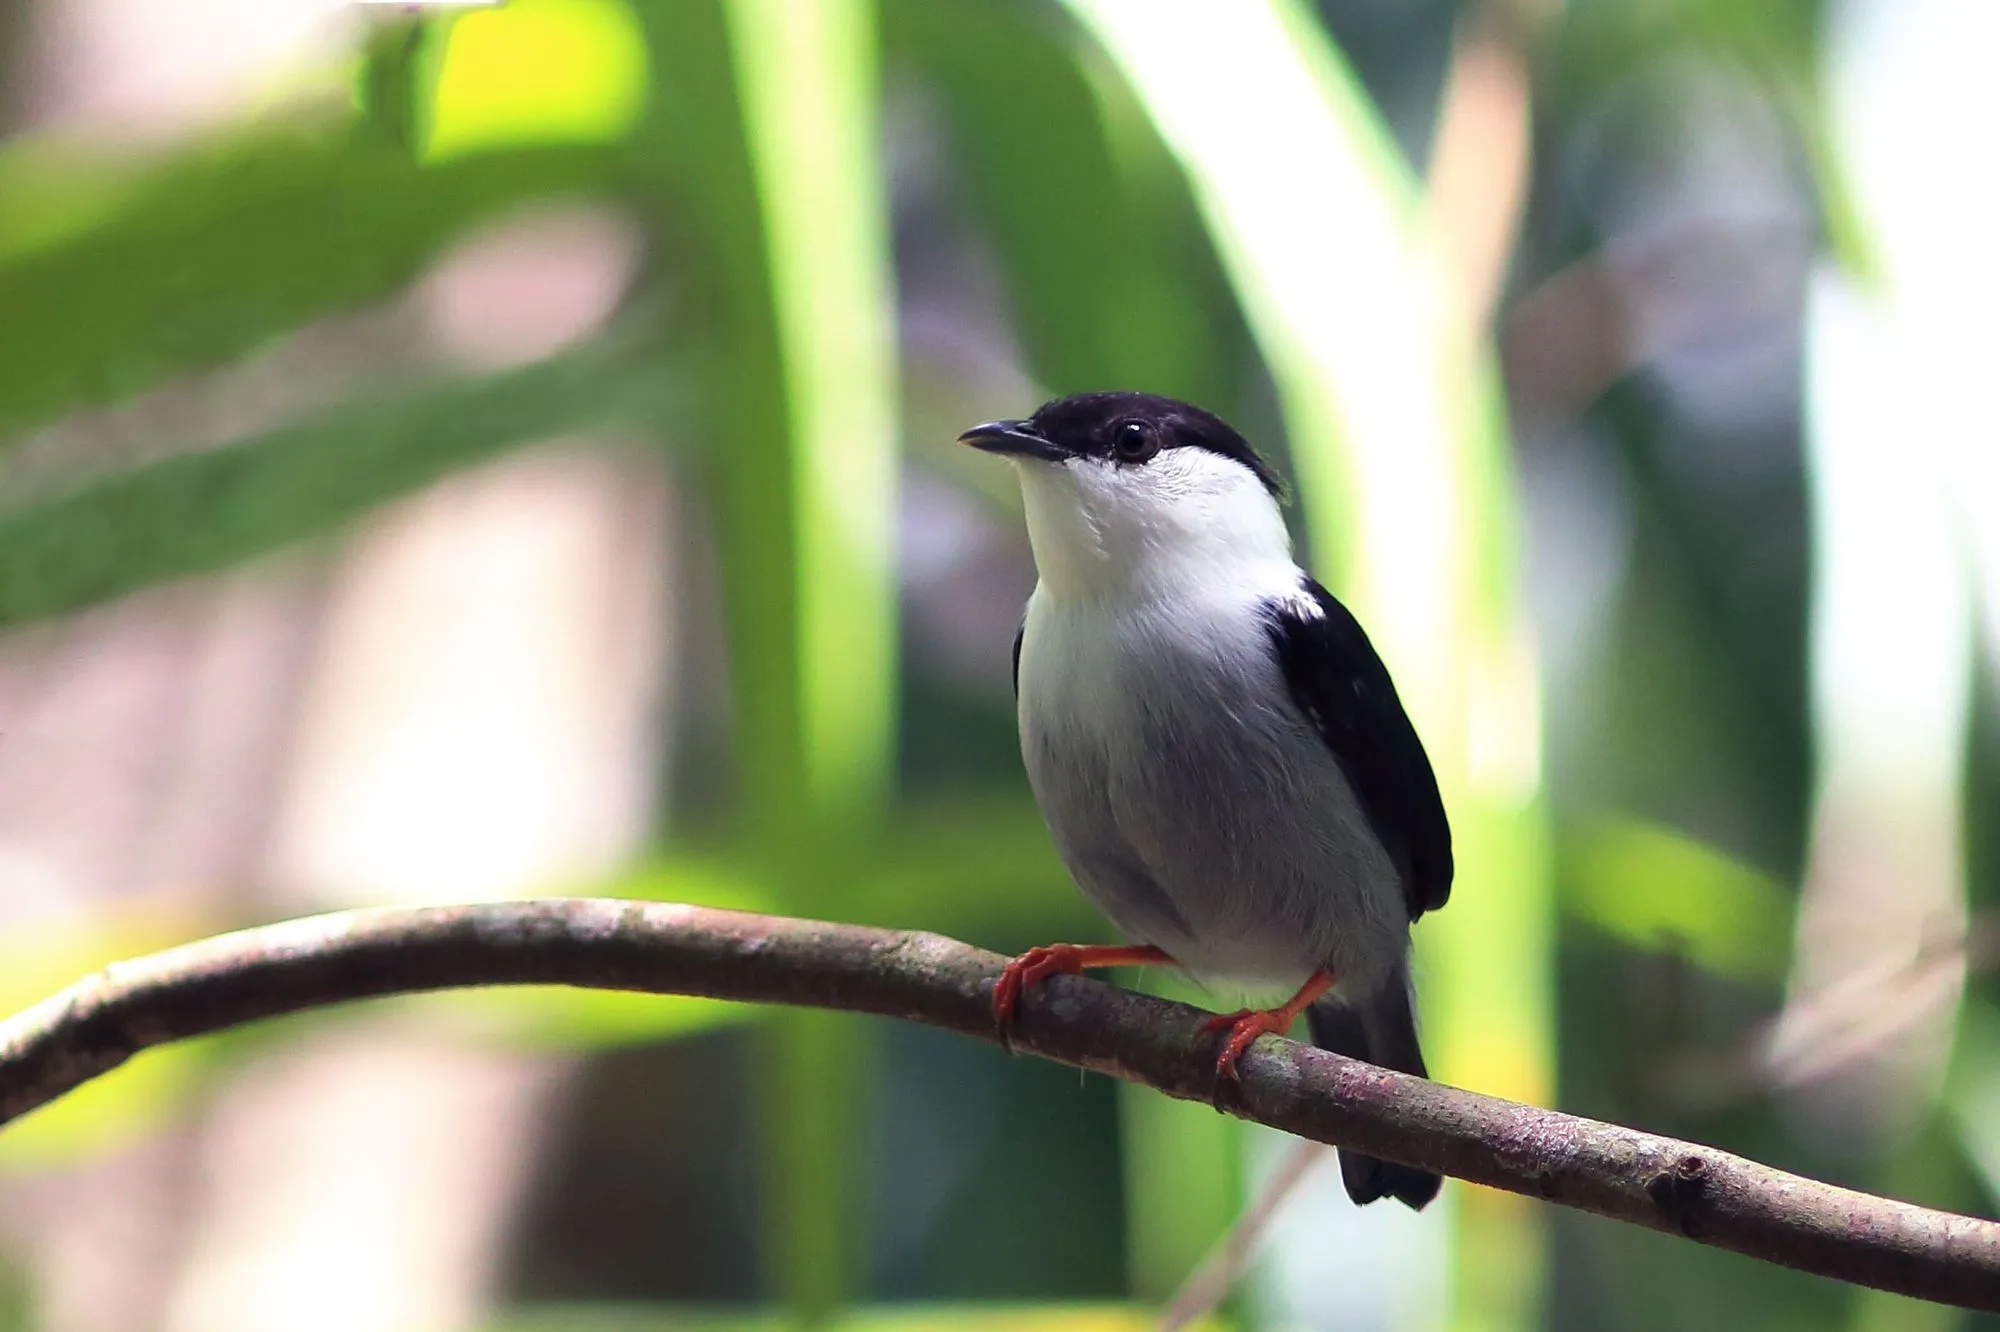 White-bearded manakin facts talk about the species of birds found in tropical South America